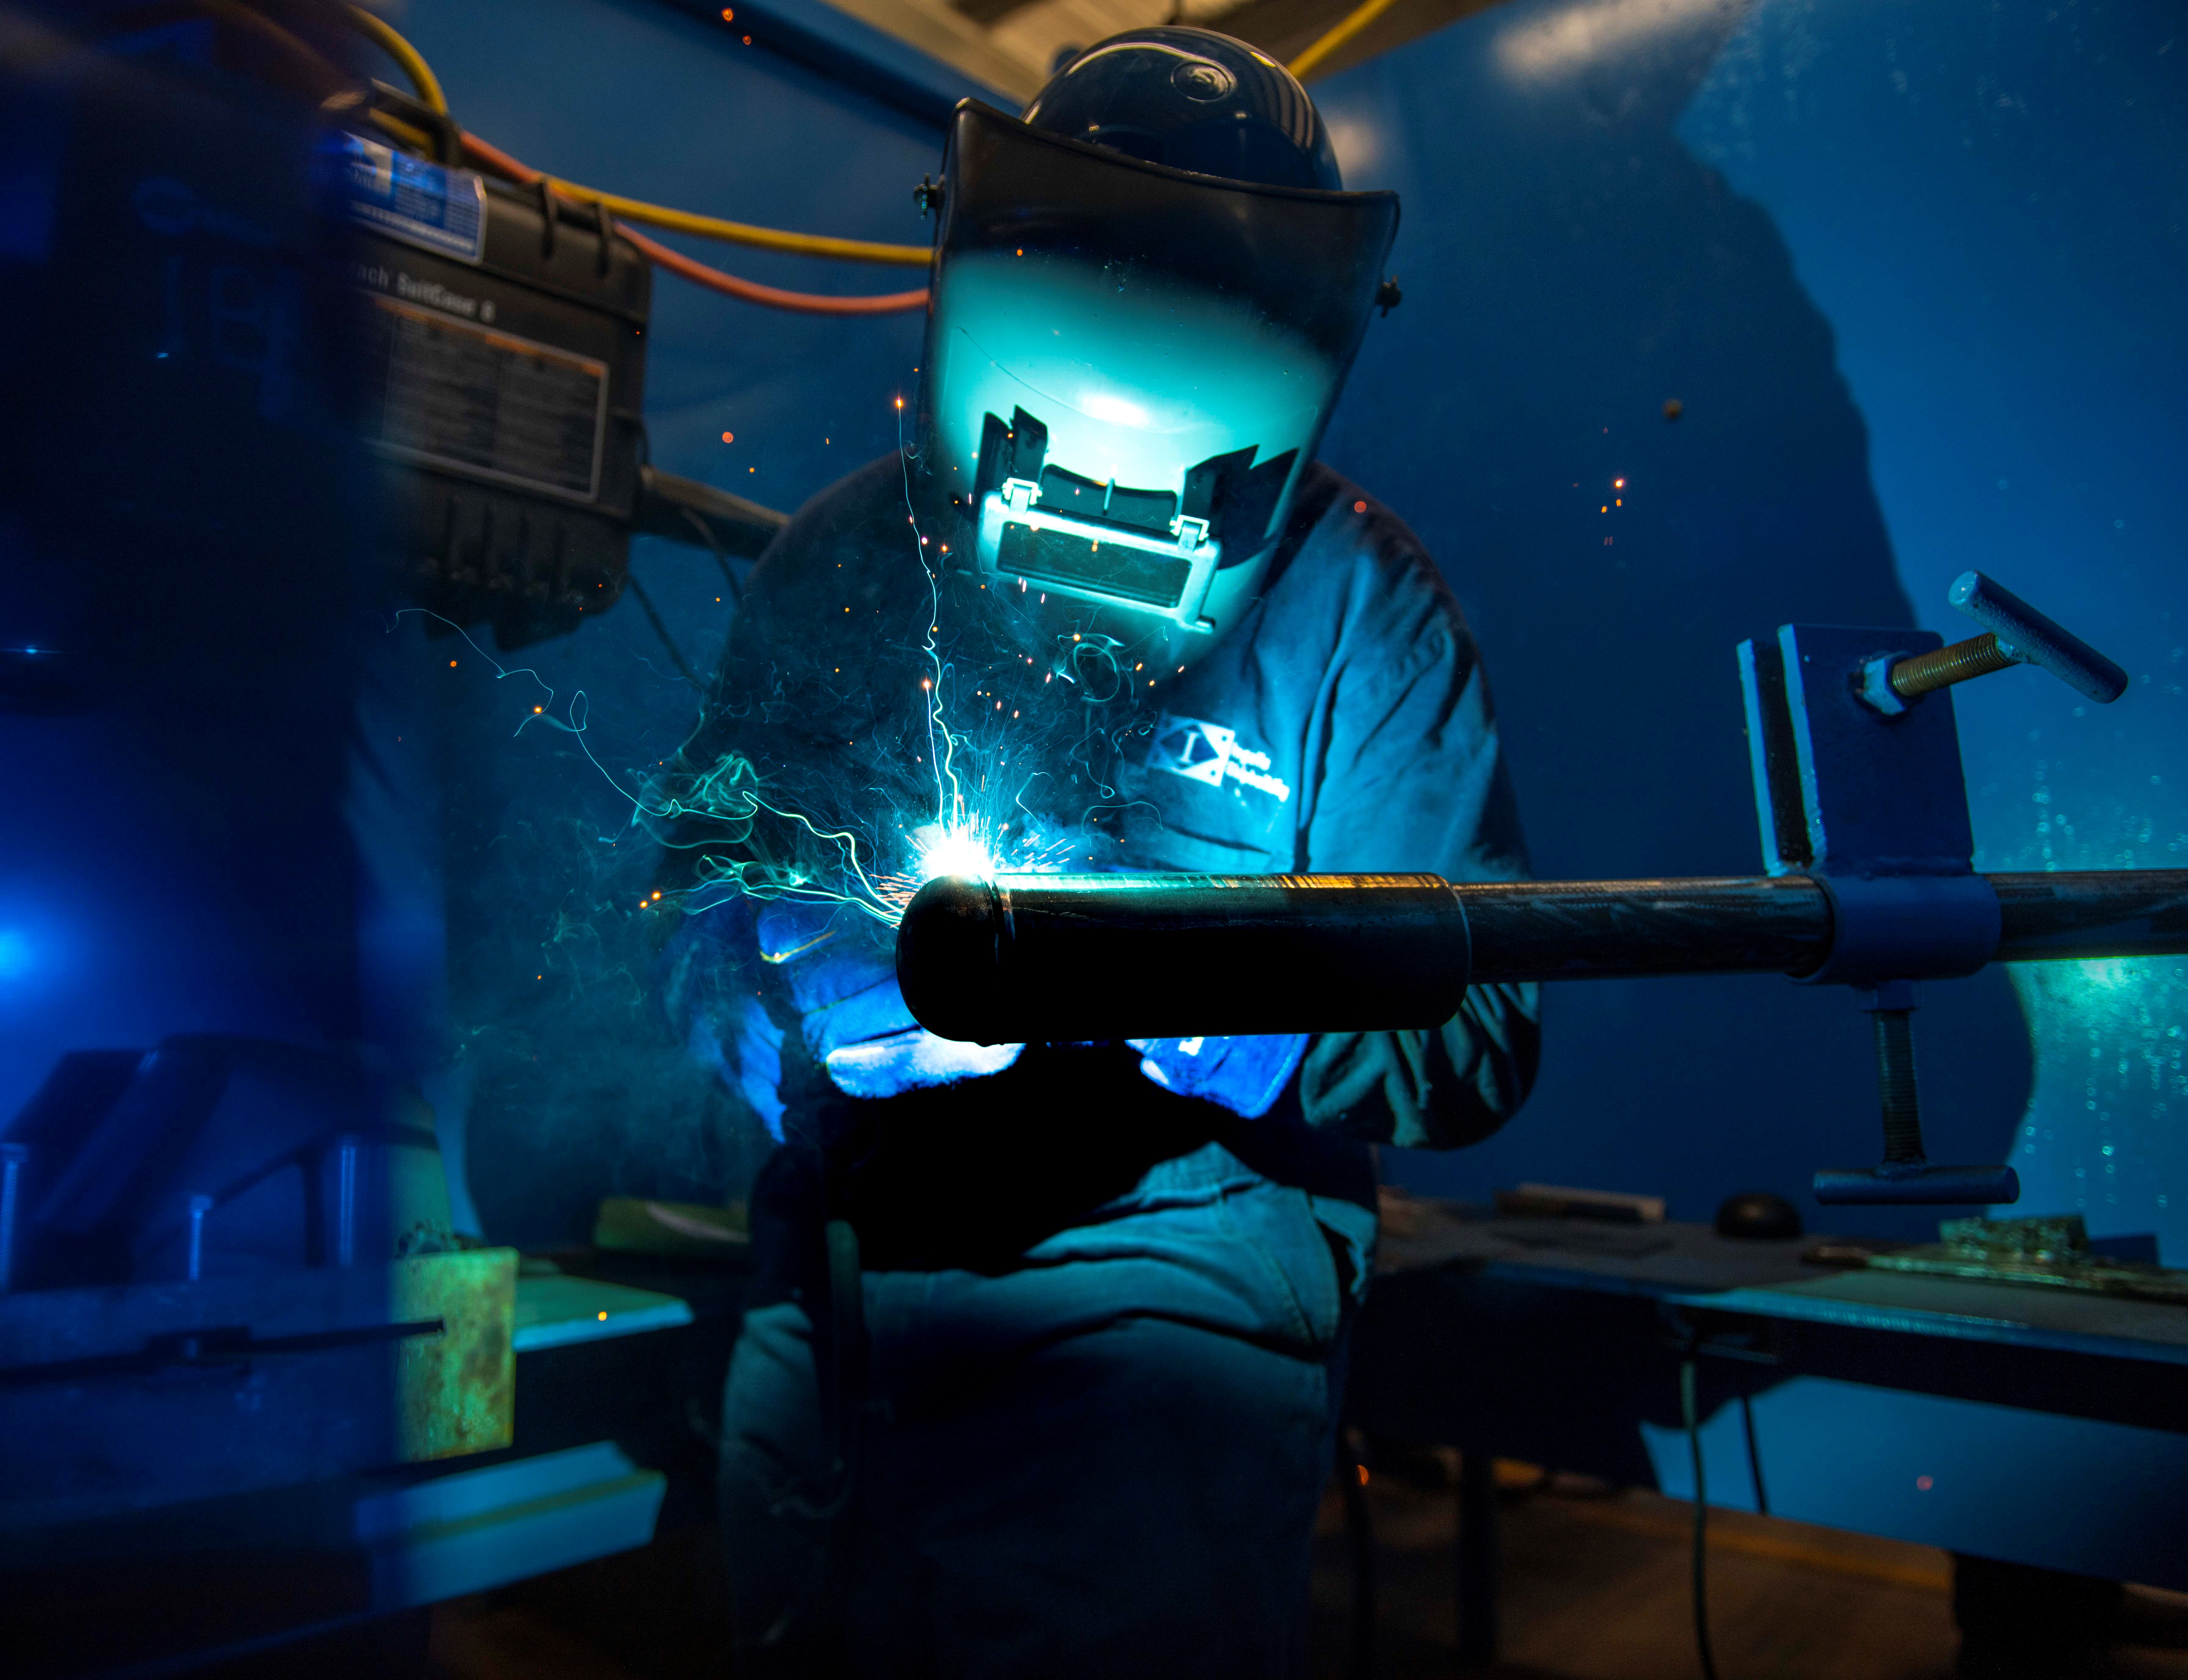 Project MFG welding competition at Ingalls Shipbuilding 1